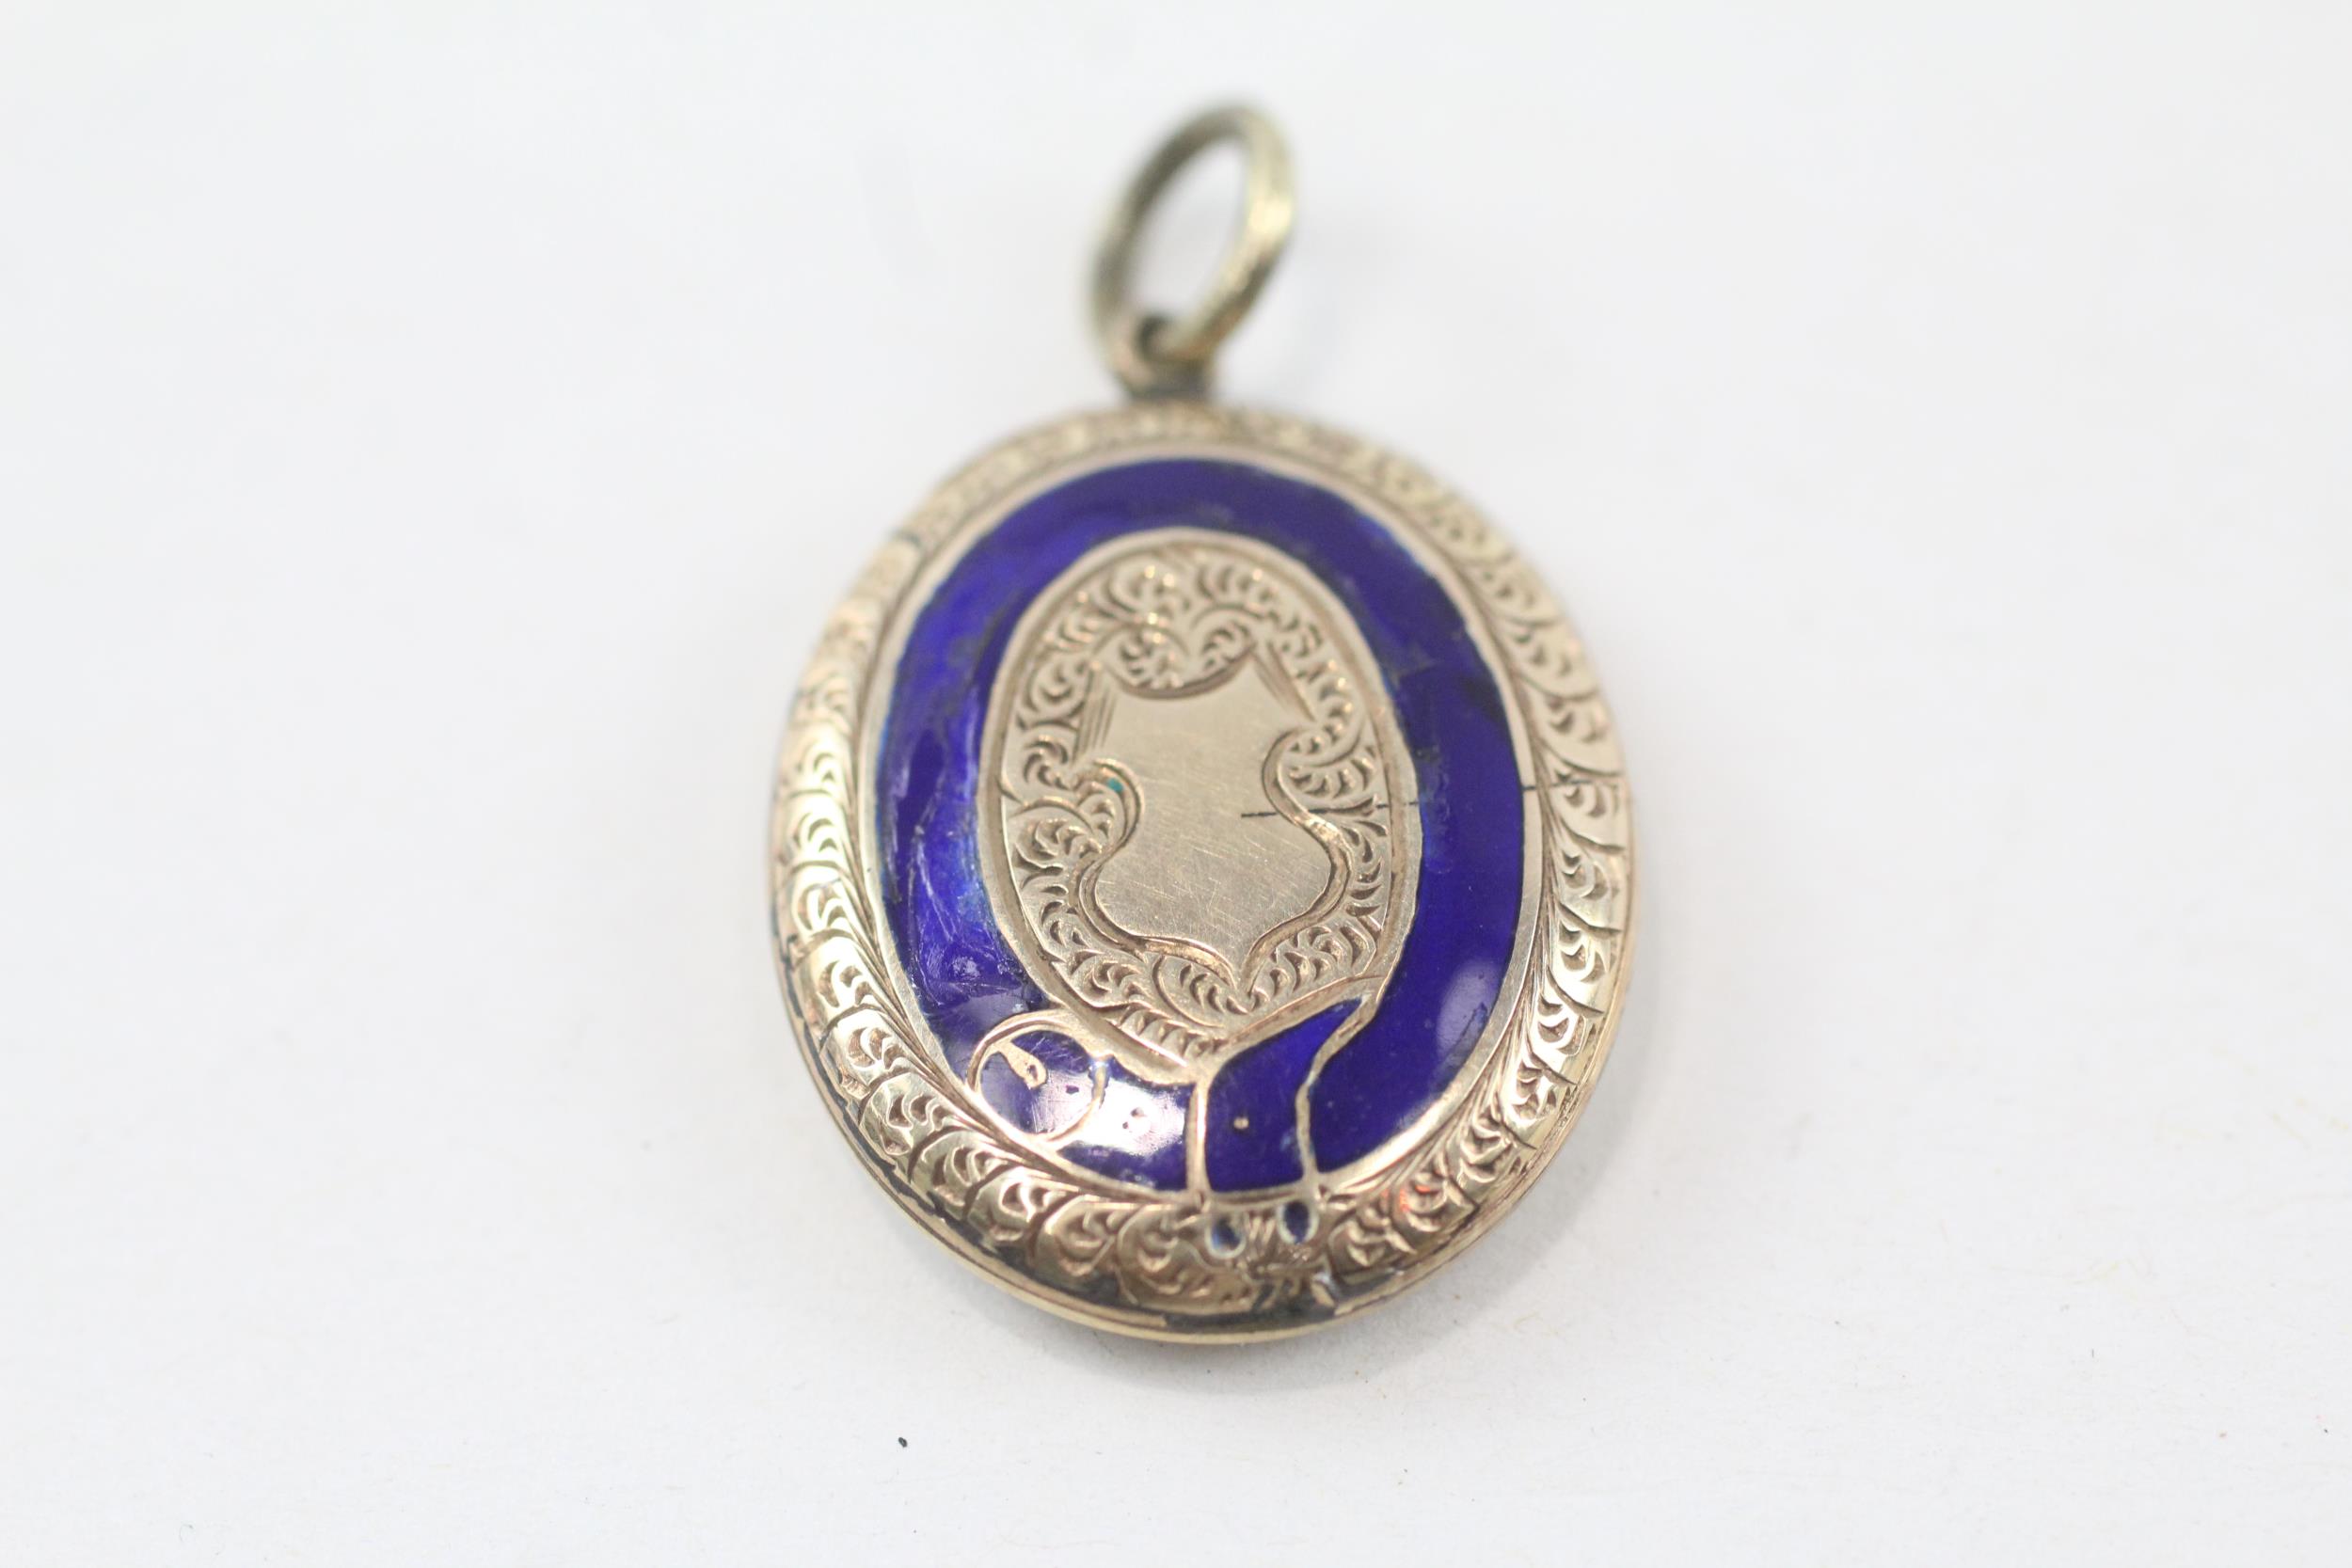 2x 9ct gold back & front locket pendants with buckle & enamel detail (15.9g) - Image 2 of 5